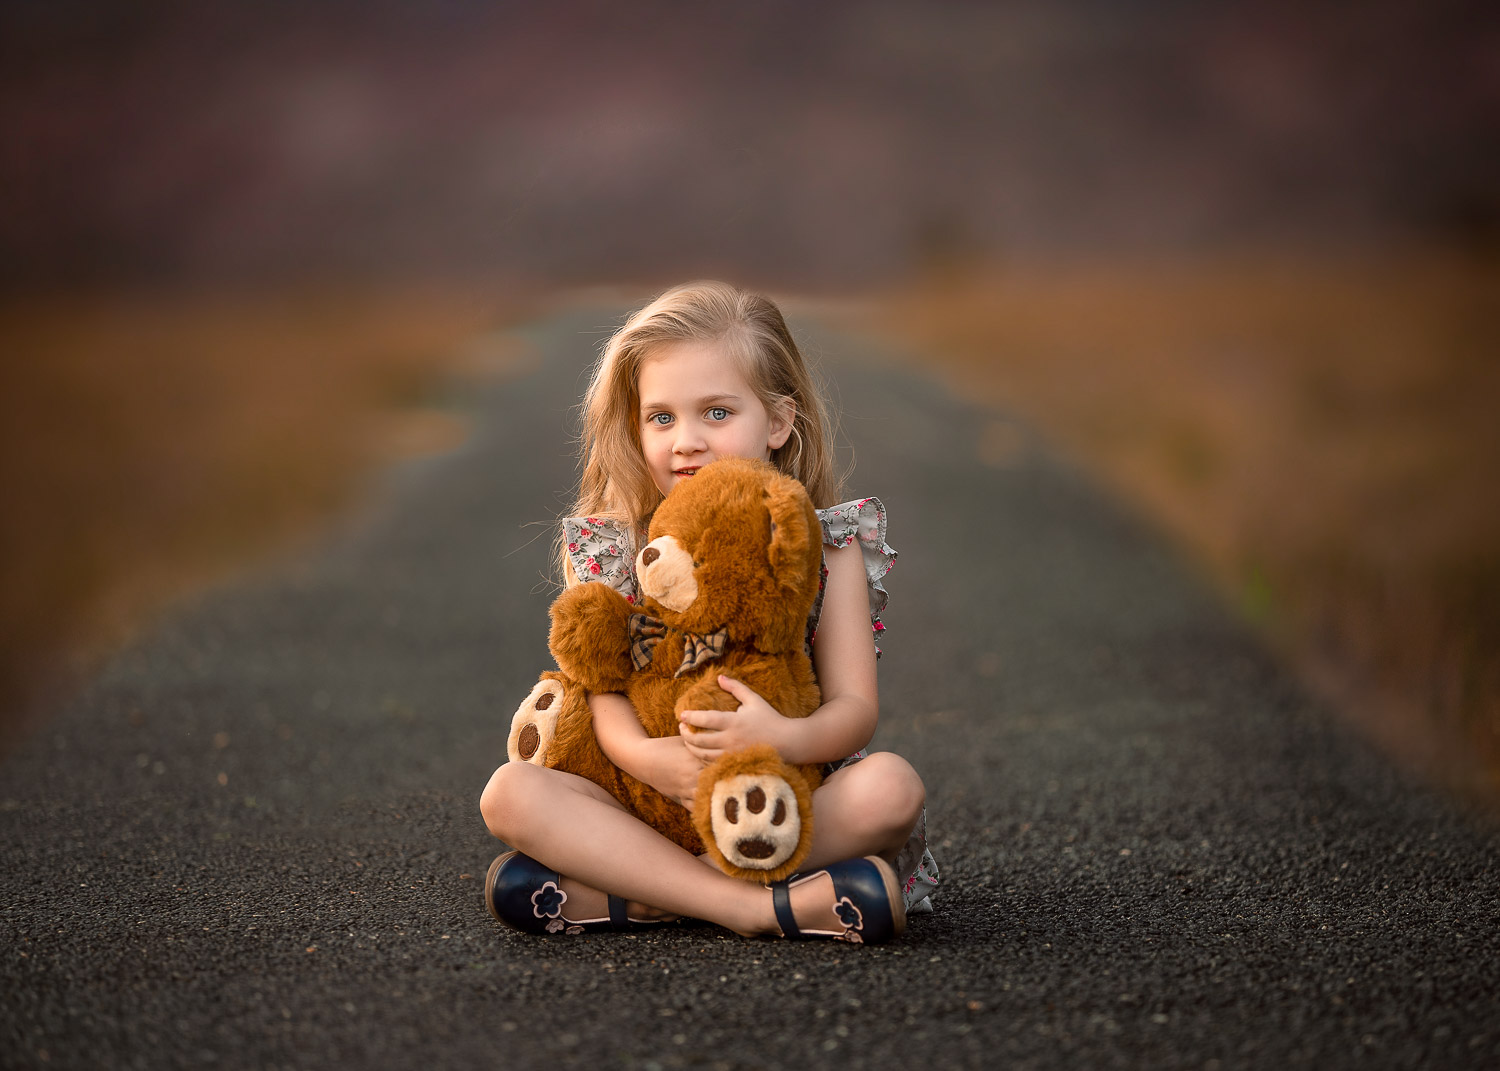 4 year old Perth girl holding teddy during outdoor photoshoot